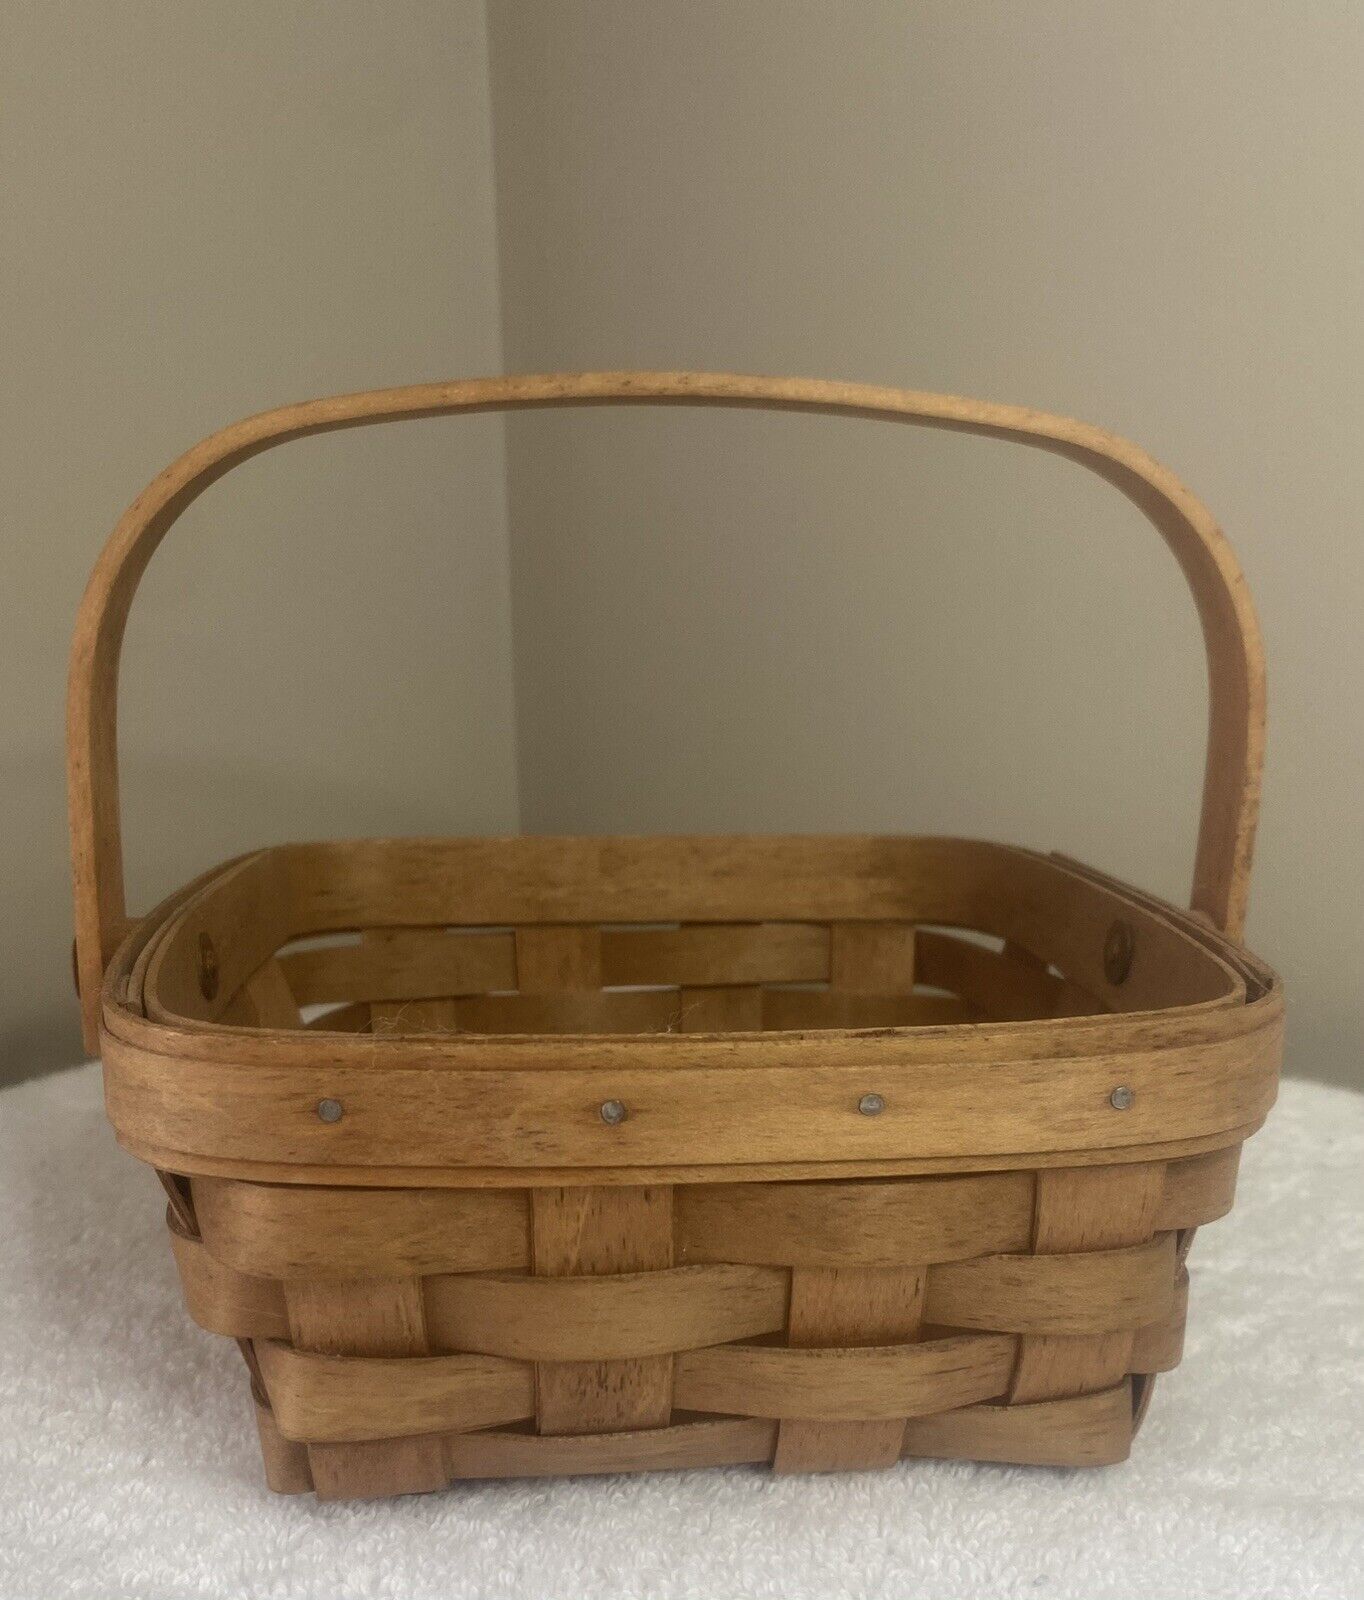 LONGABERGER SMALL Square BERRY BASKET W/ Swing Handle Signed And Dated 2003